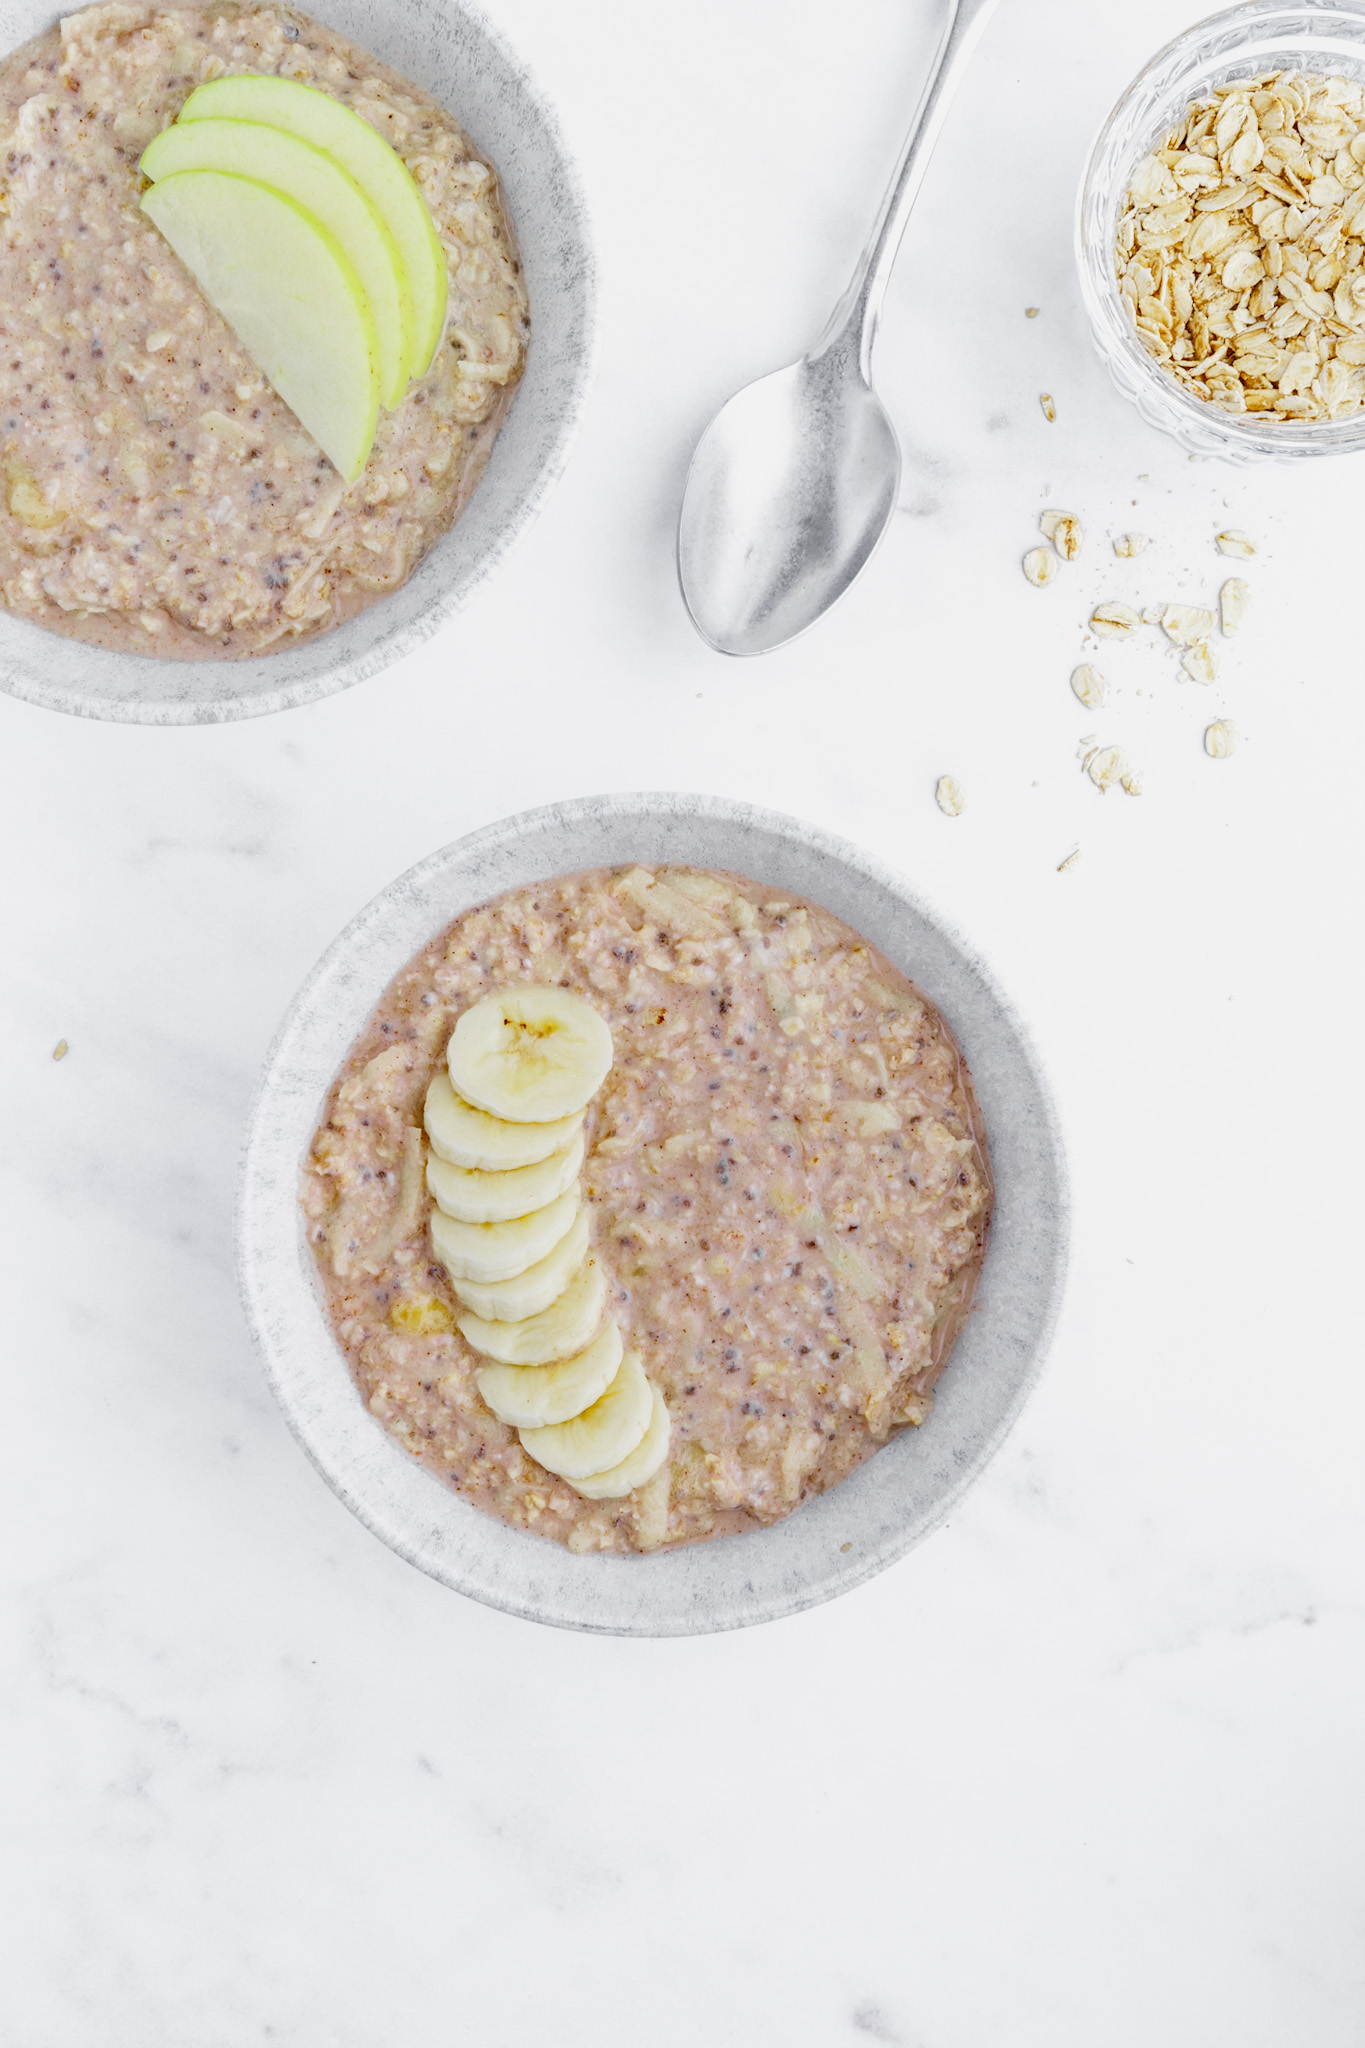 Apple and banana overnight oats with peanut butter